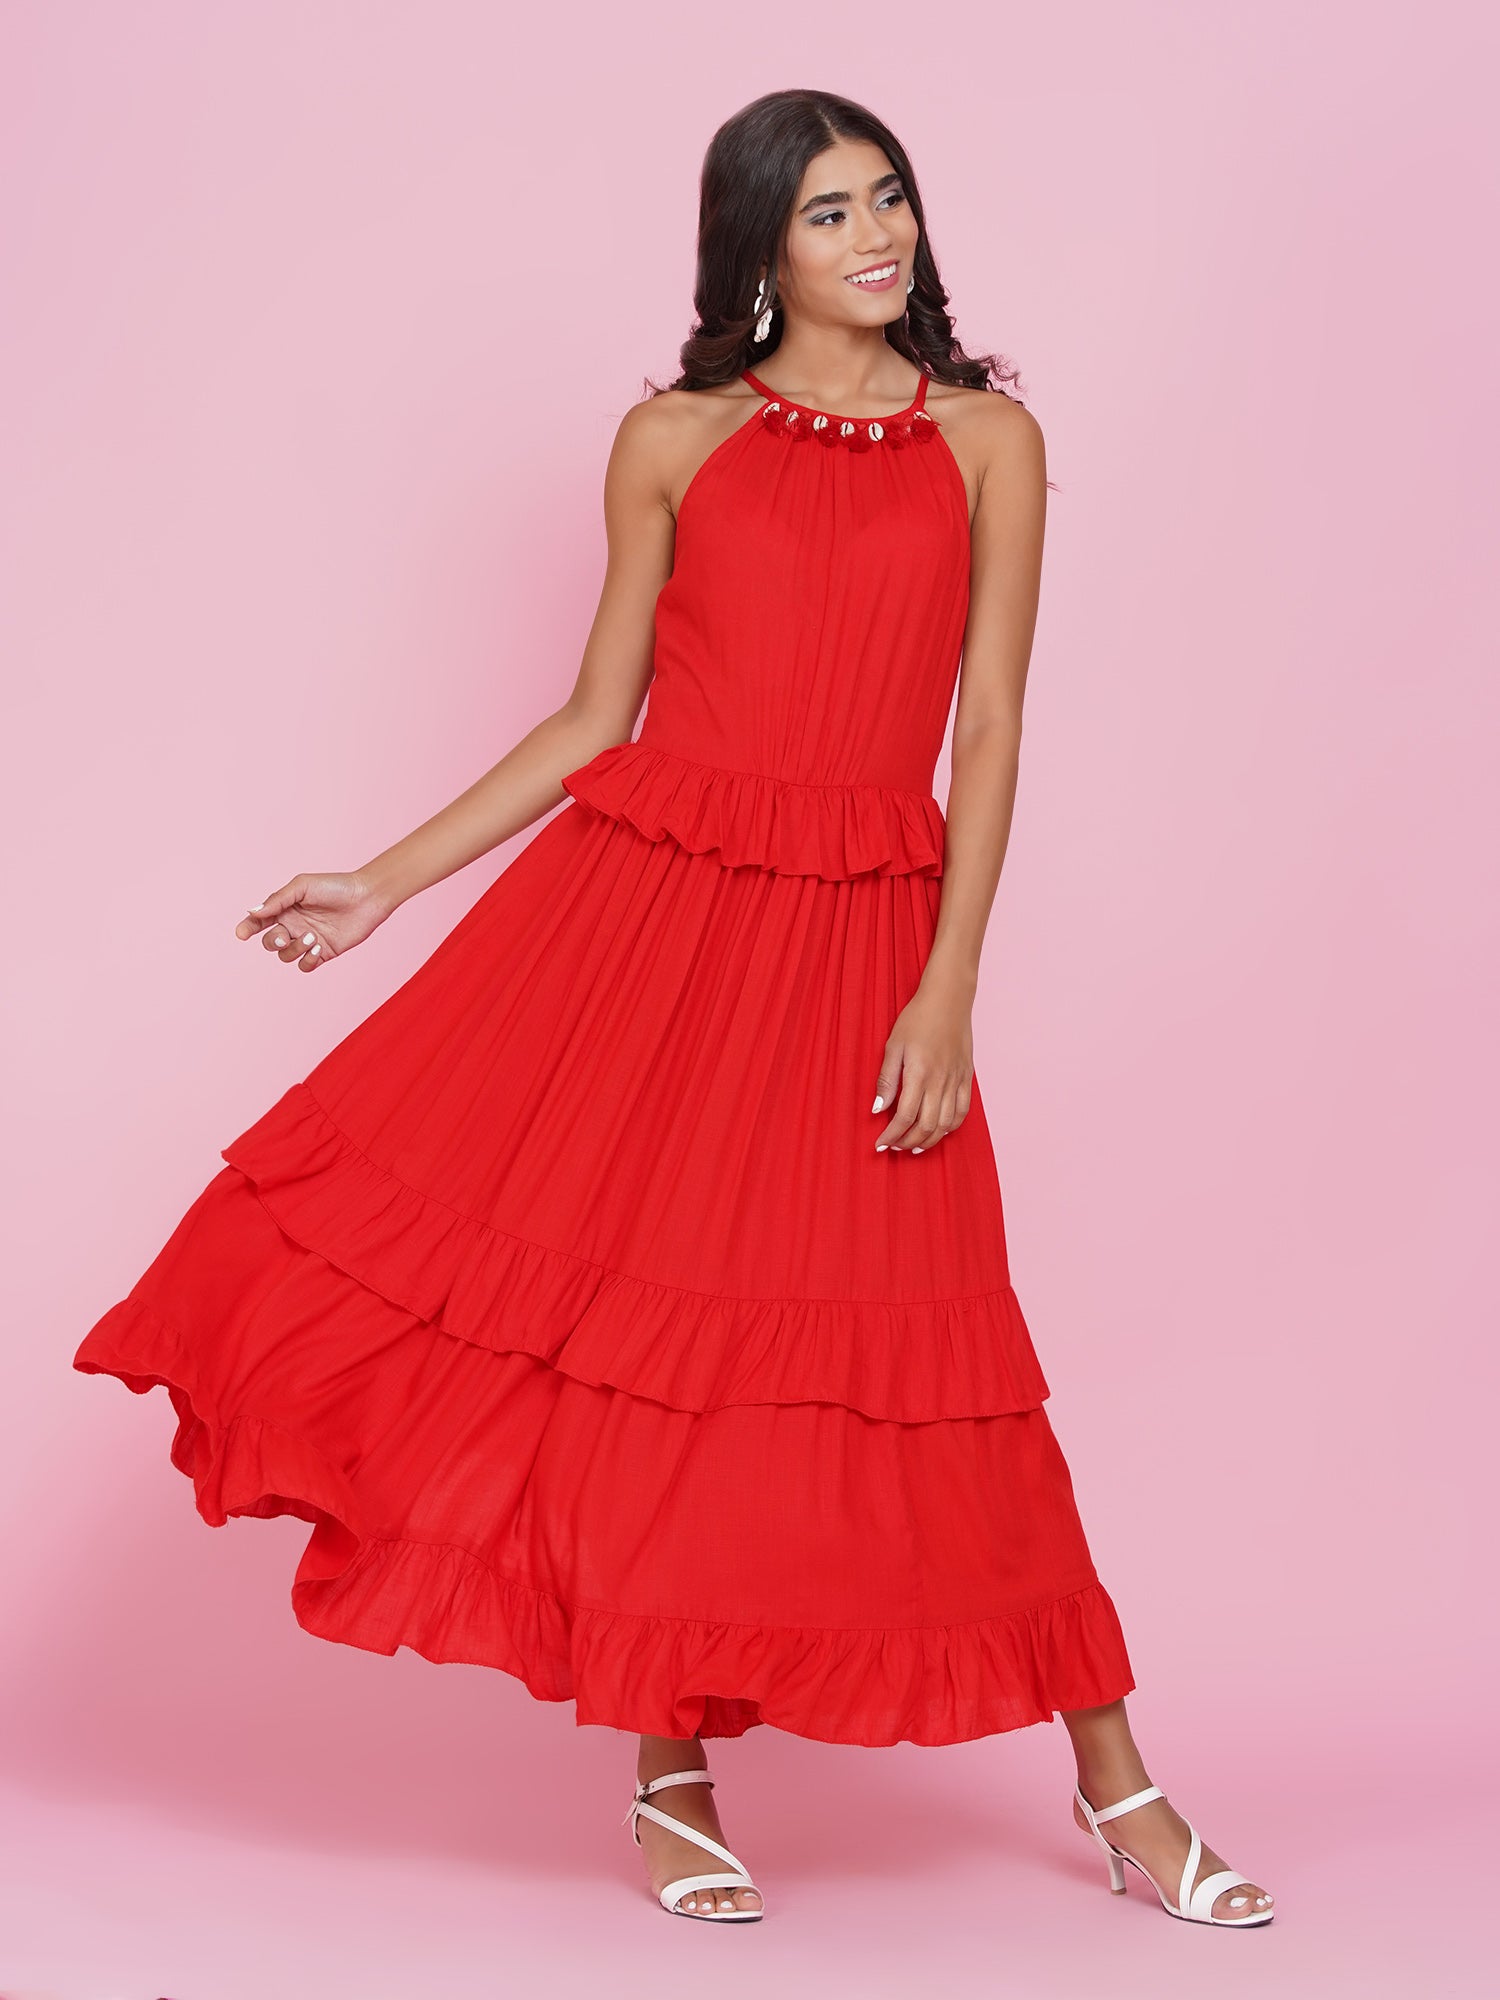 Red tiered Rayon dress-WRK434